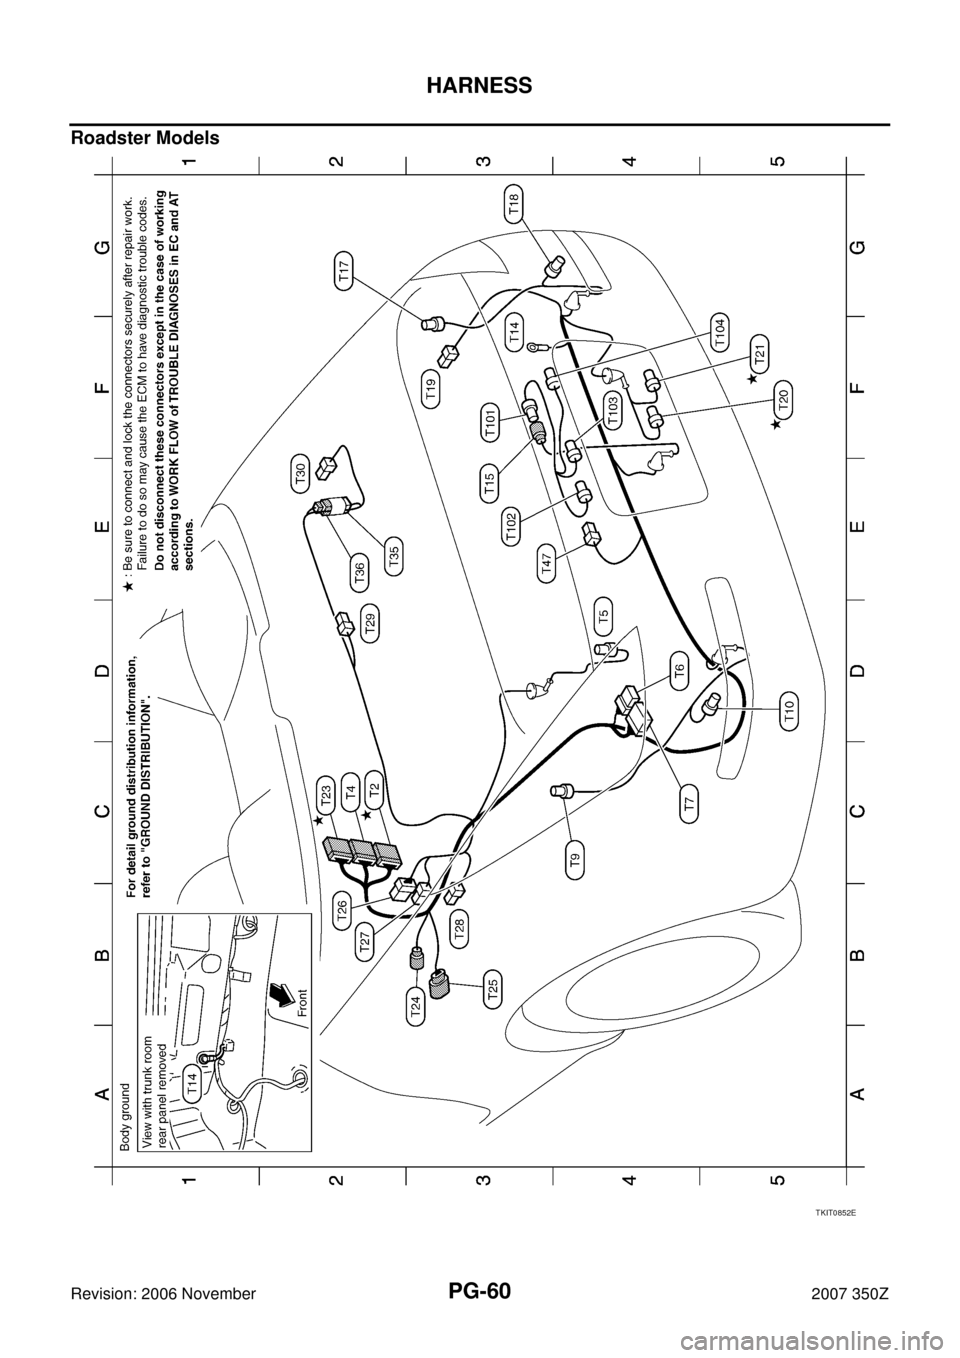 NISSAN 350Z 2007 Z33 Power Supply, Ground And Circuit Repair Manual PG-60
HARNESS
Revision: 2006 November2007 350Z
Roadster Models
TKIT0852E 